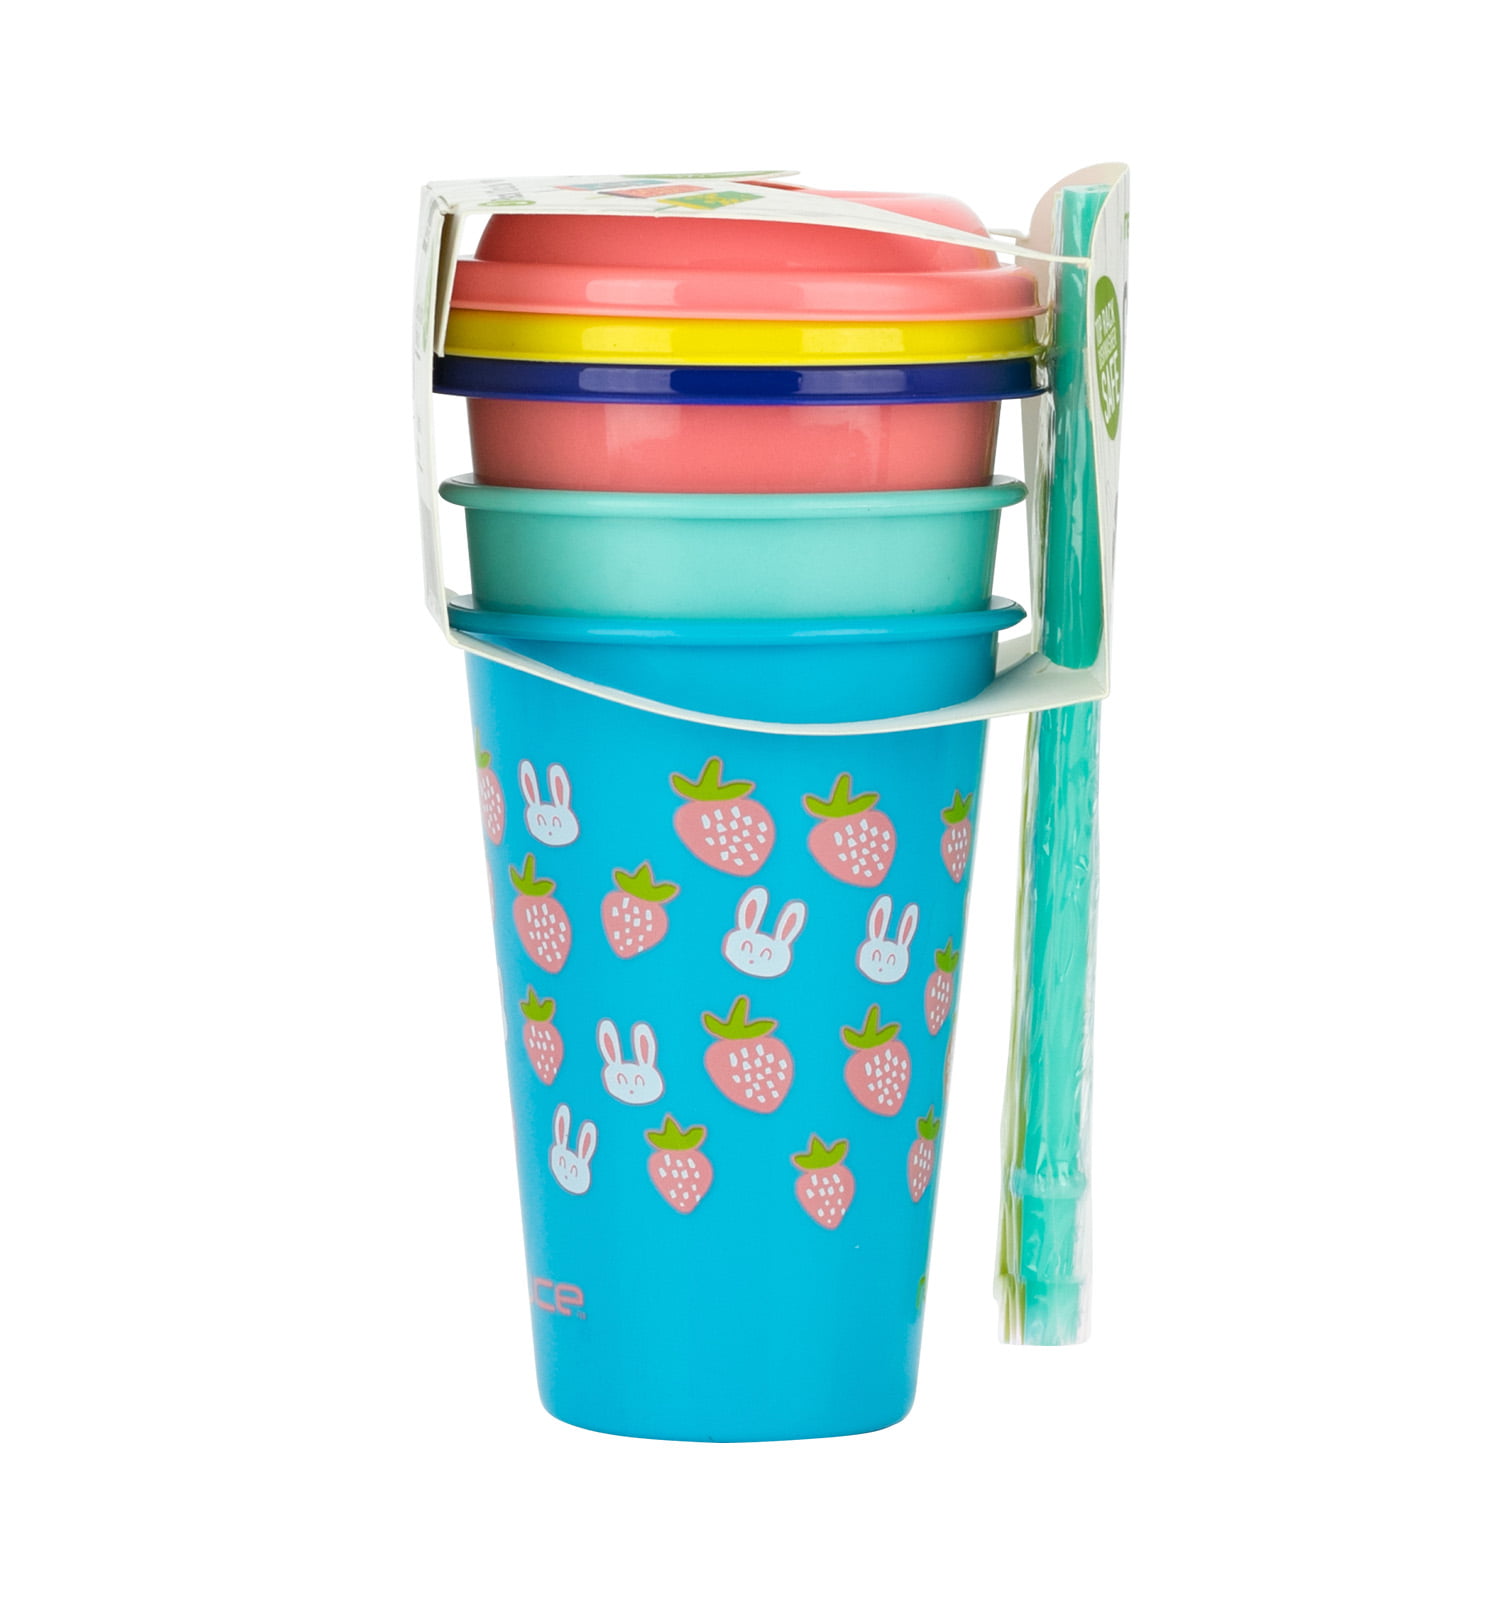 Re Play Made in USA 10 oz. Straw Cups for Toddlers, Pack of 4 - Reusable Kids Cups with Straws and Lids, Dishwasher/Microwave Safe - Toddler Cups